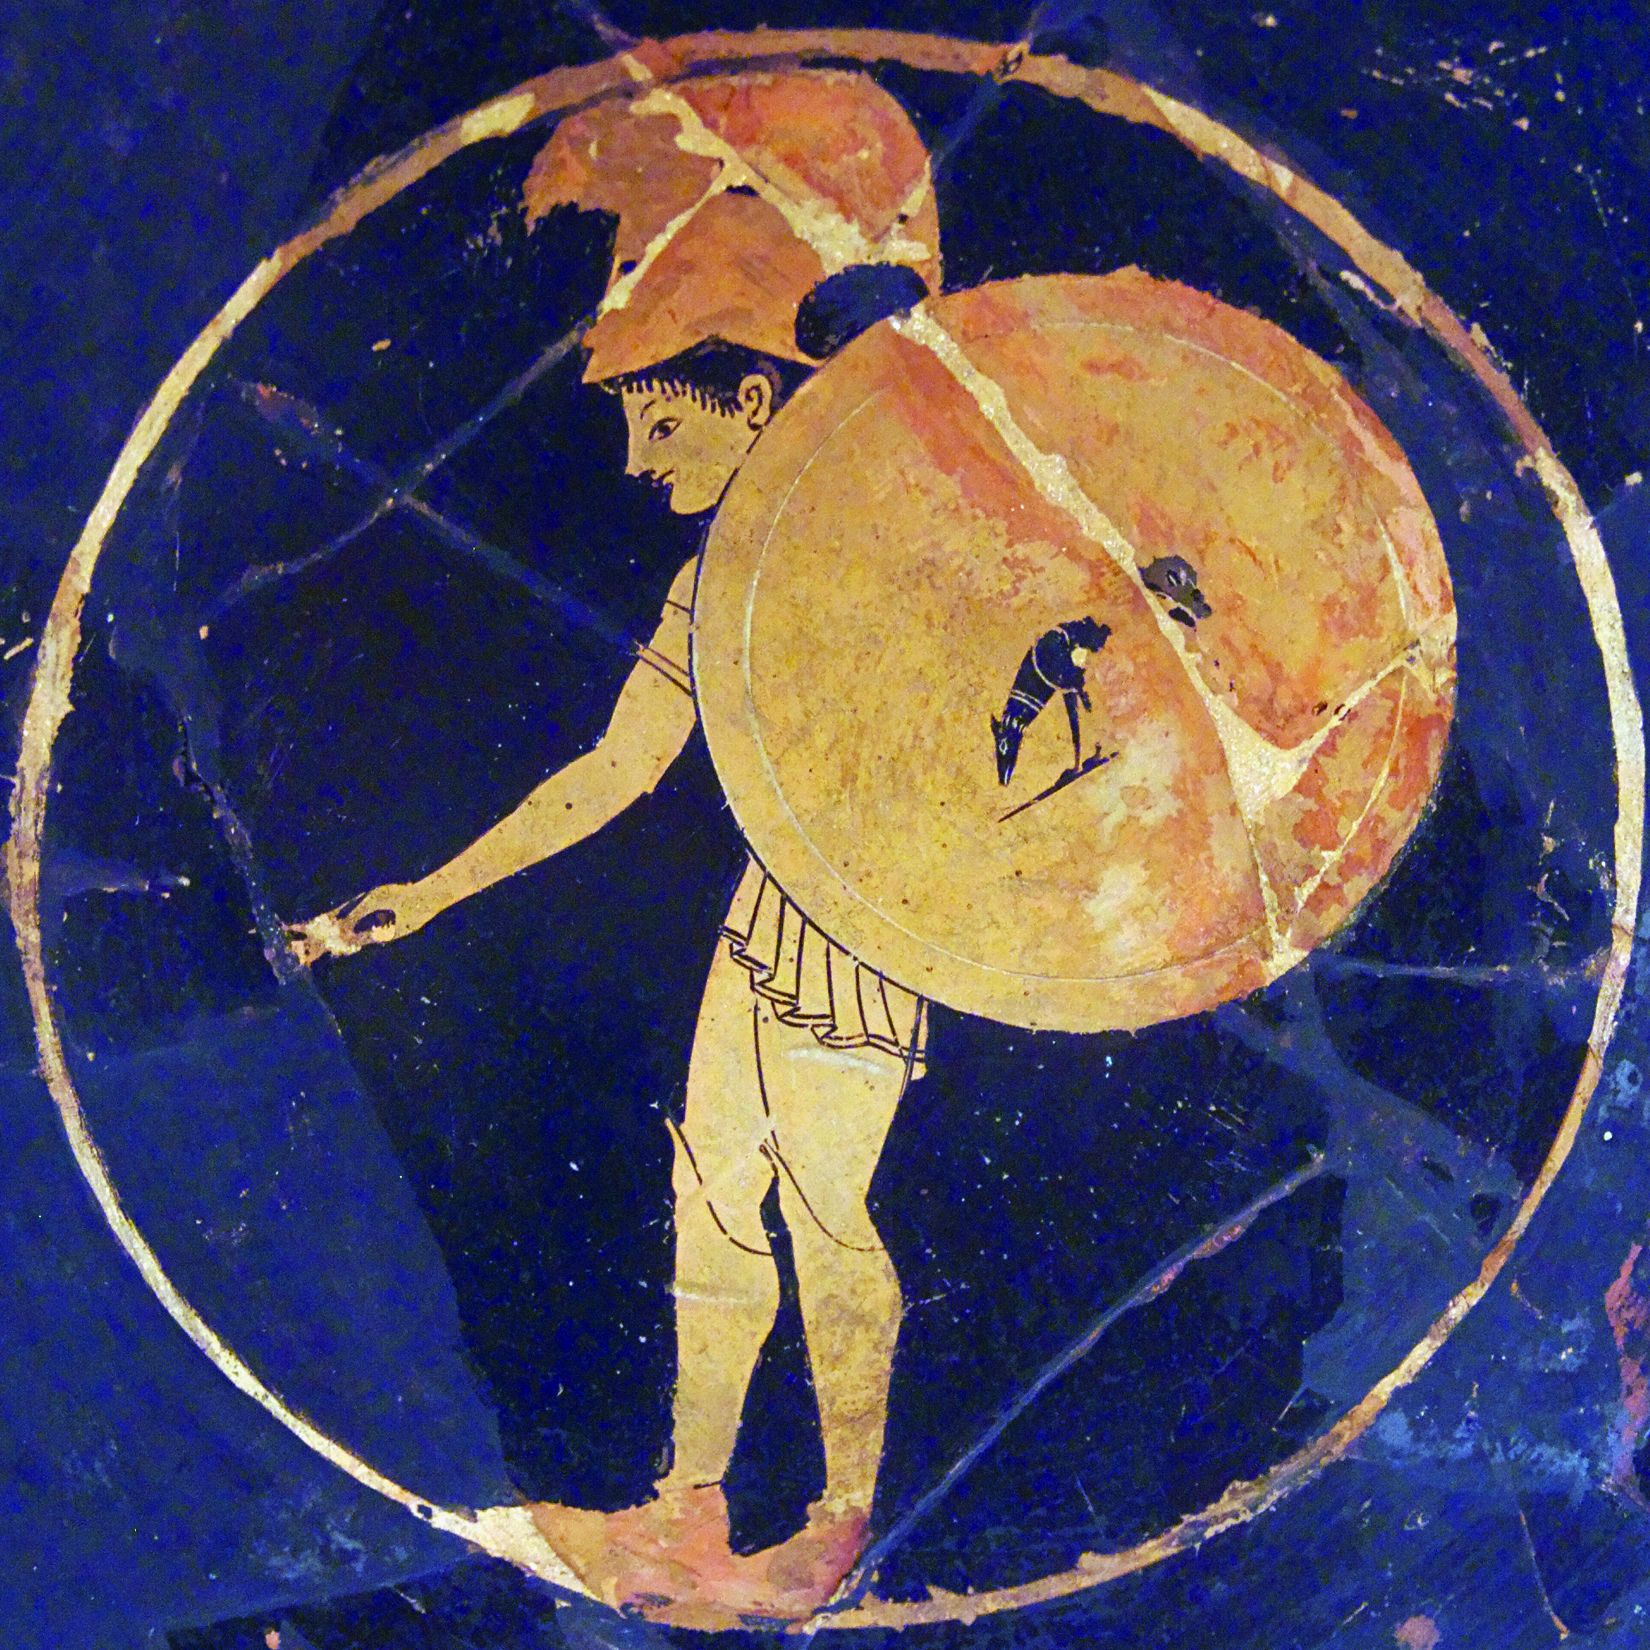 A savage hoplite flourishes a shield decorated improbably with the drawing of a dog.